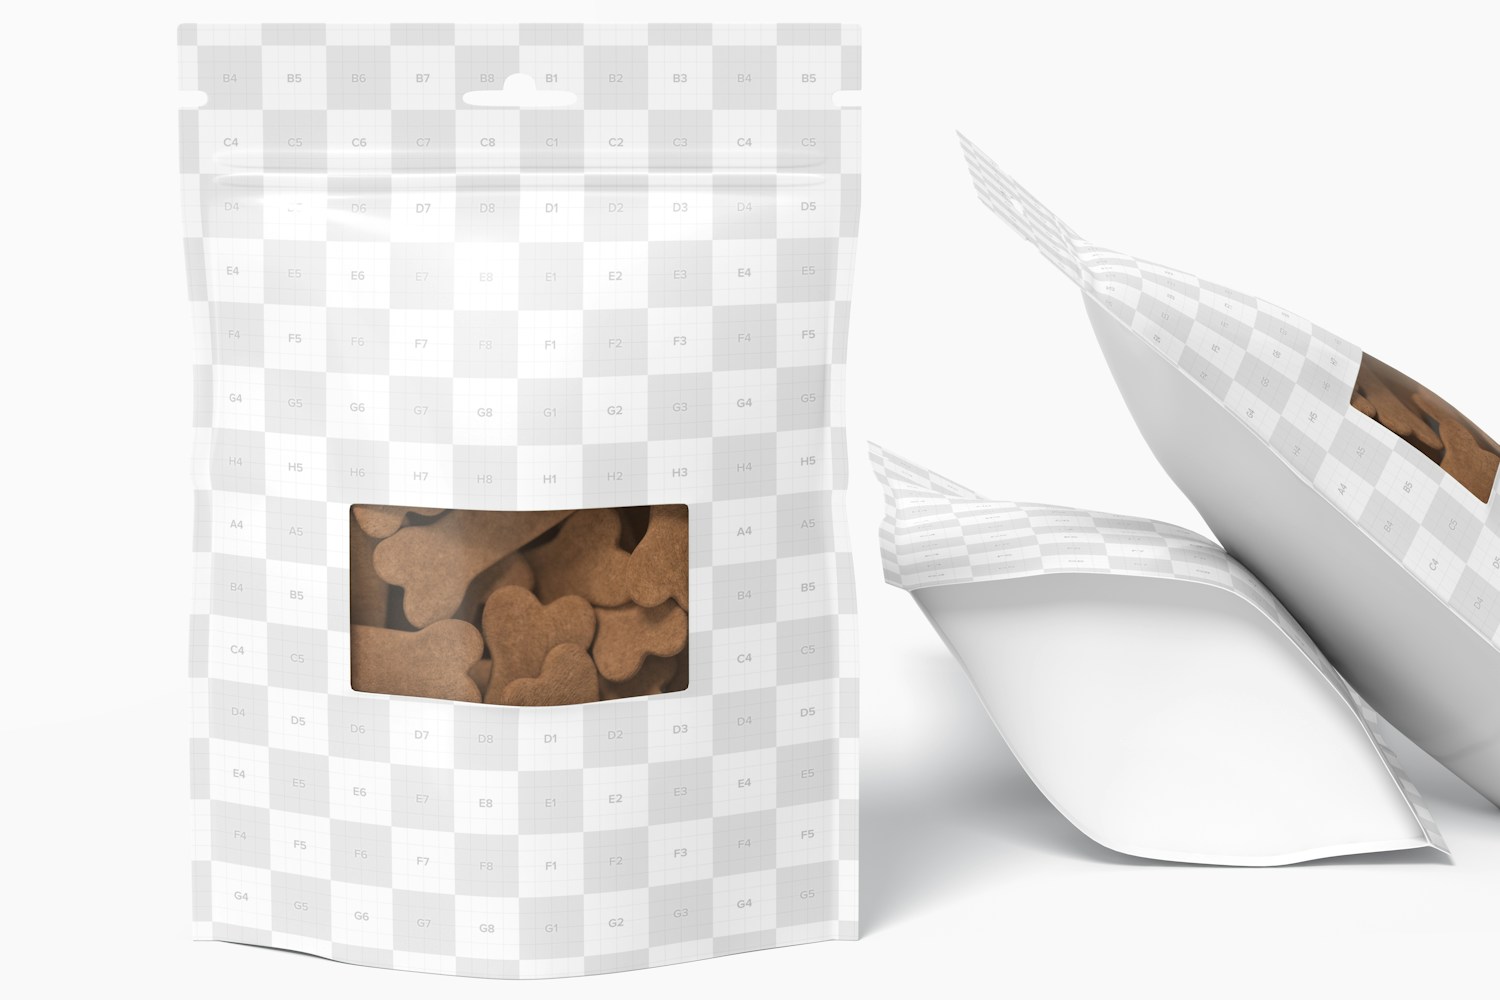 Dog Treat Packaging Mockup, Front View